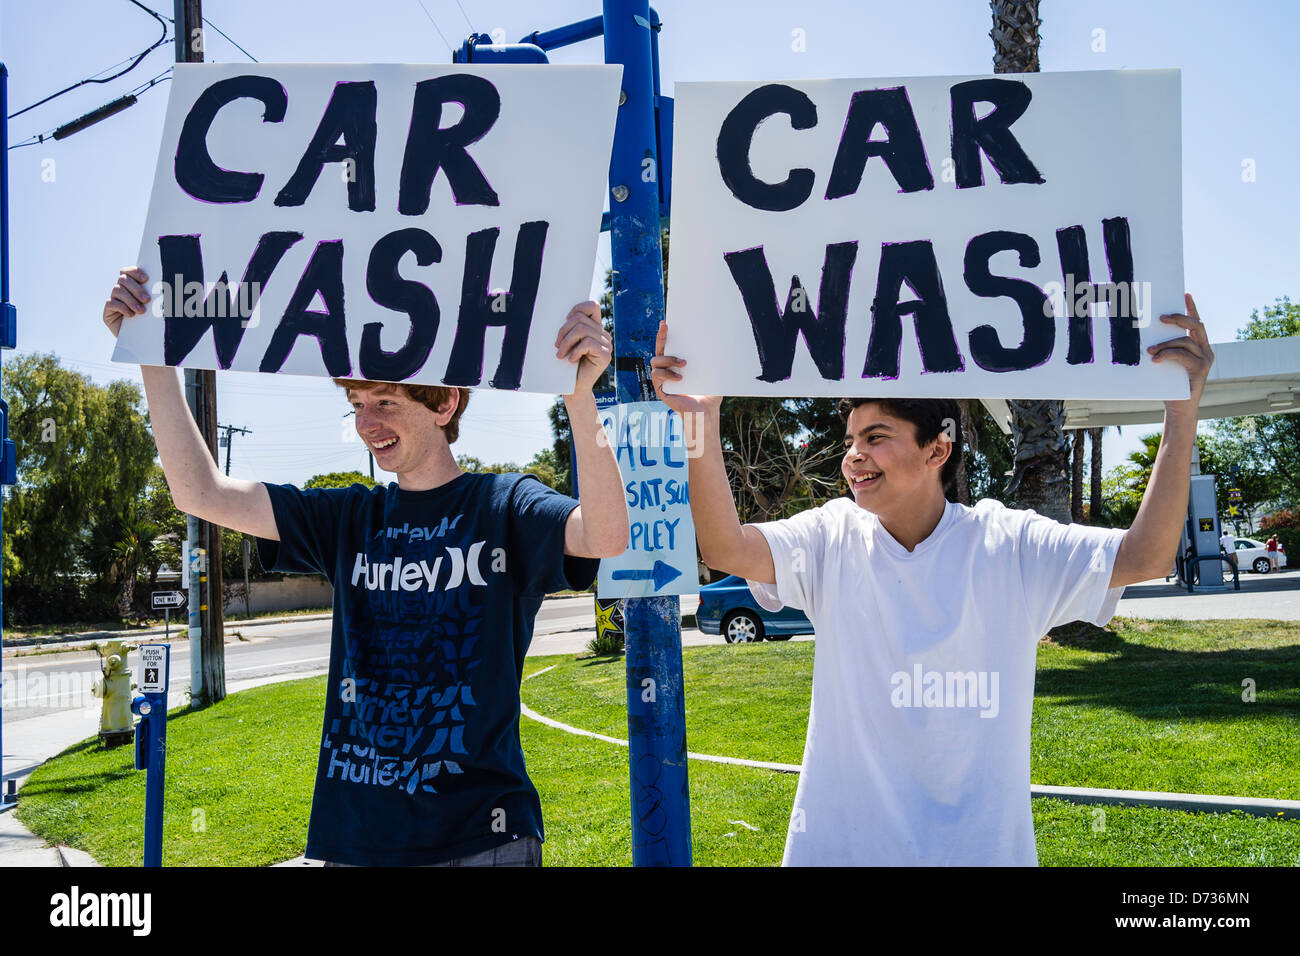 Two high school students, trying to get business, hold up signs that read 'Car Wash' at a busy intersection. Stock Photo